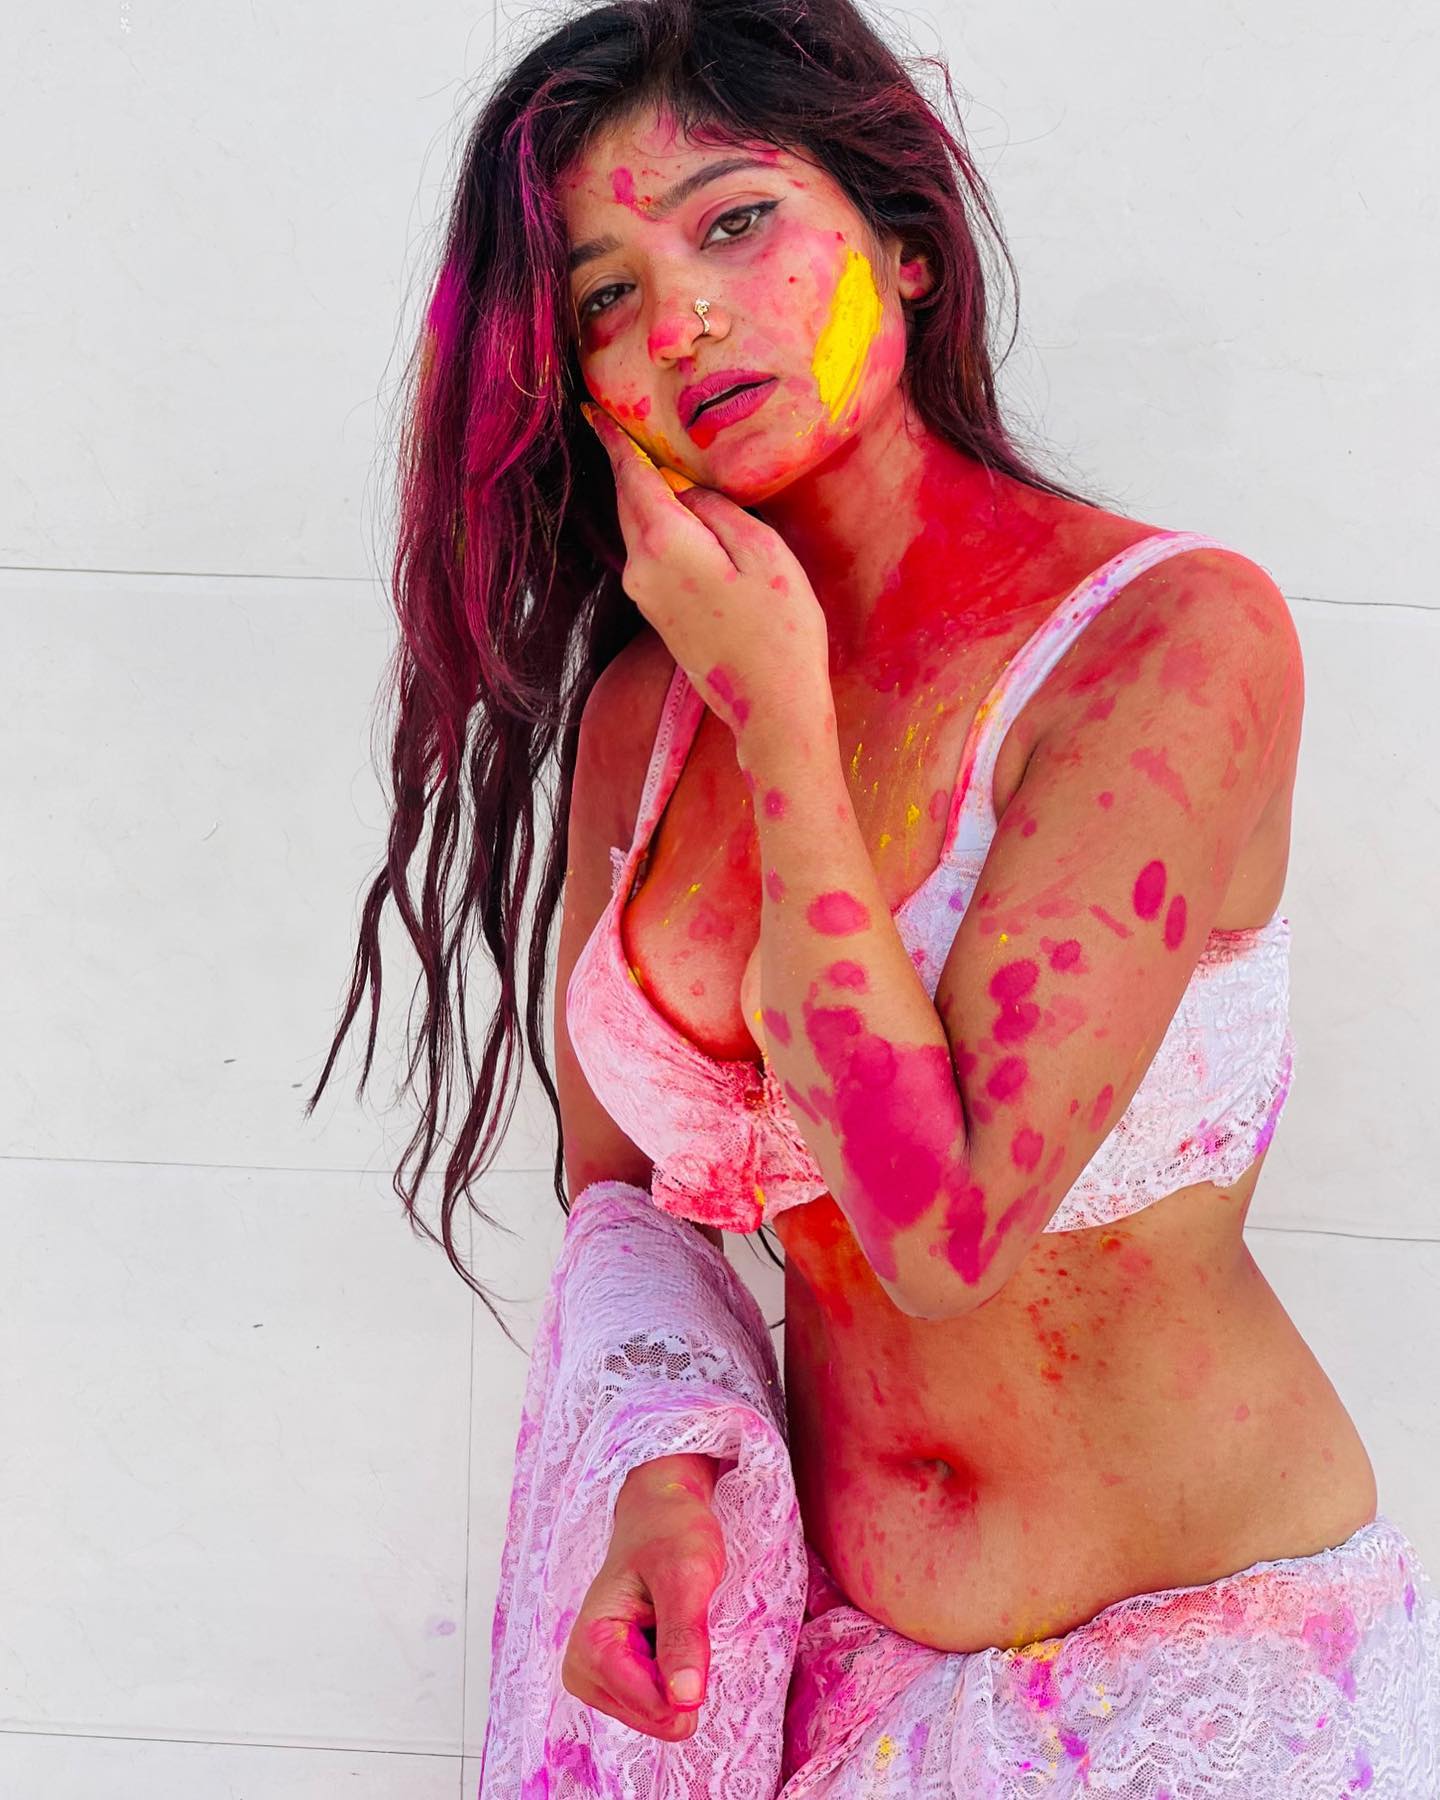 Bhojpuri babes in their sexiest avatars for Holi madness.